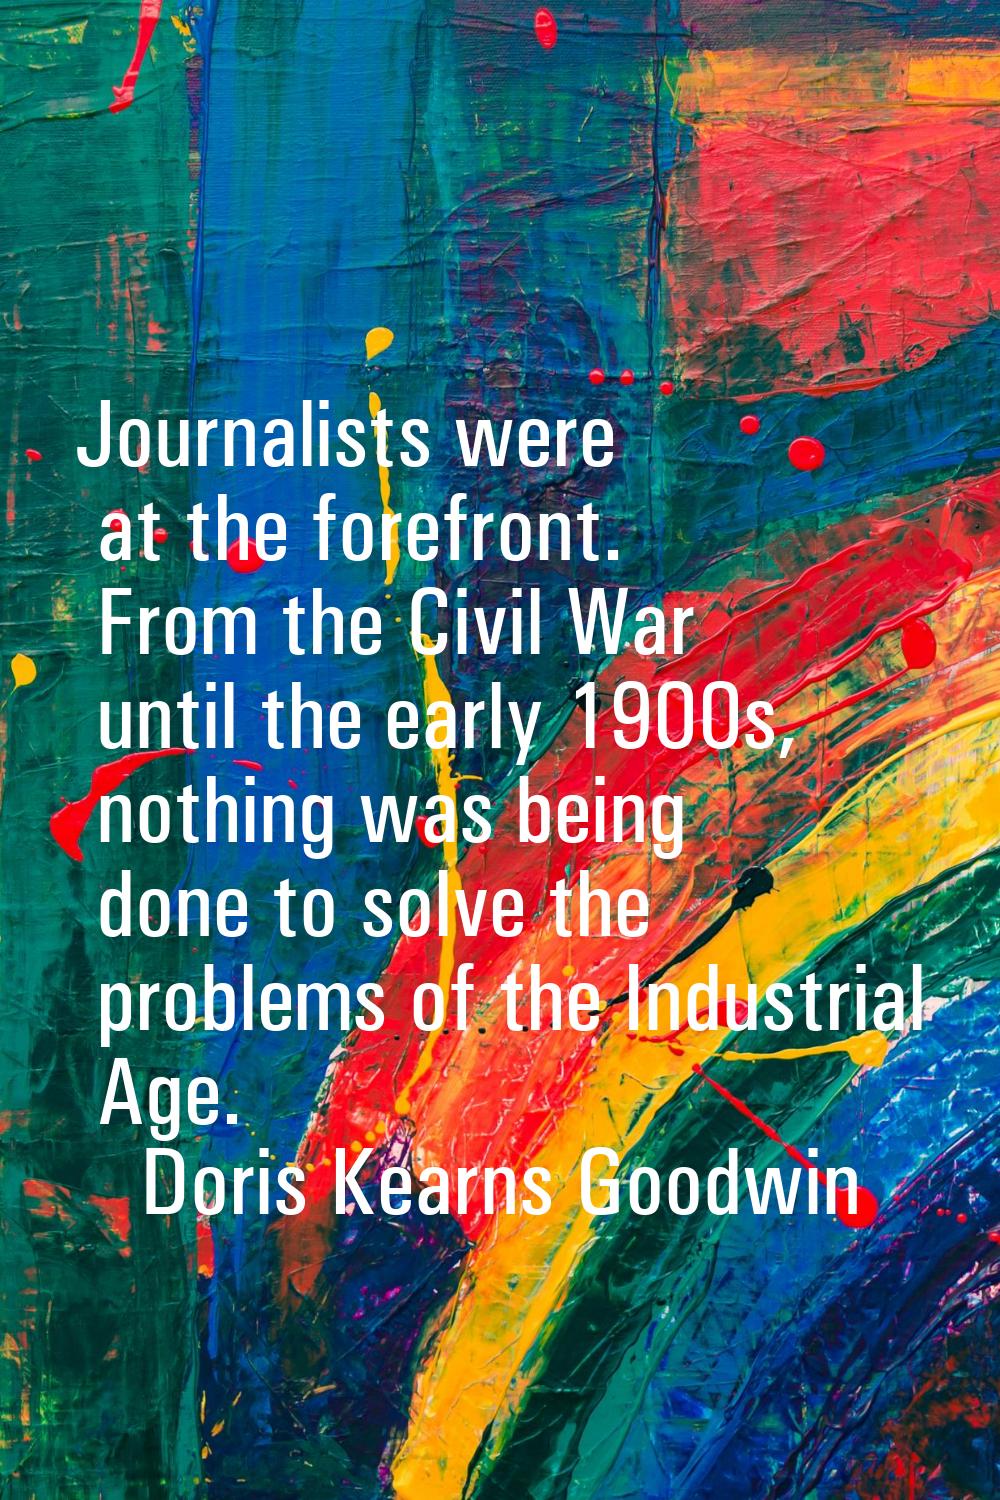 Journalists were at the forefront. From the Civil War until the early 1900s, nothing was being done